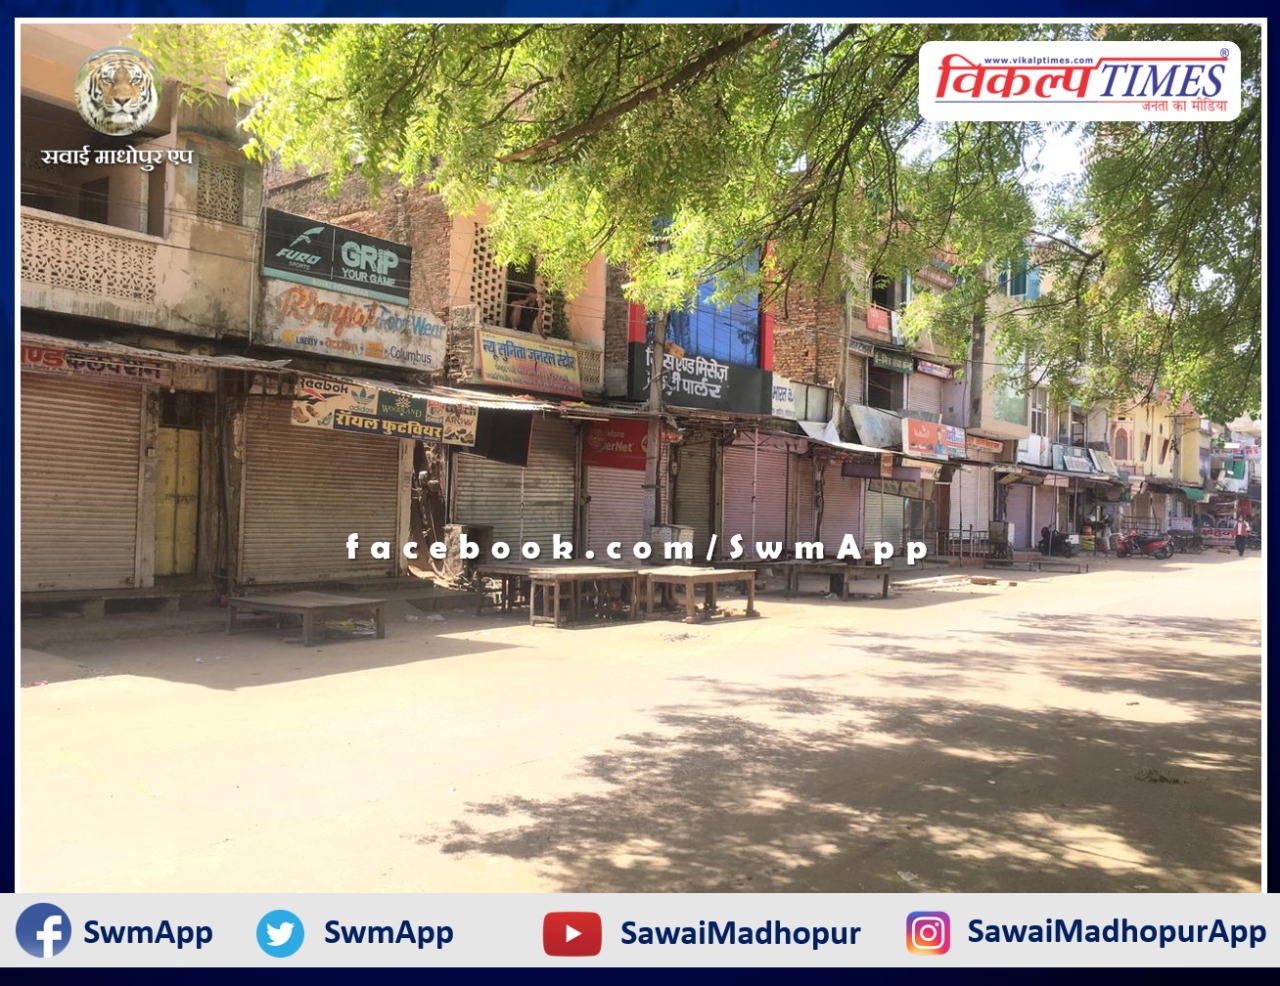 Weekend curfew will be applicable from 8 pm on Saturday to 5 am on Monday in sawai madhopur